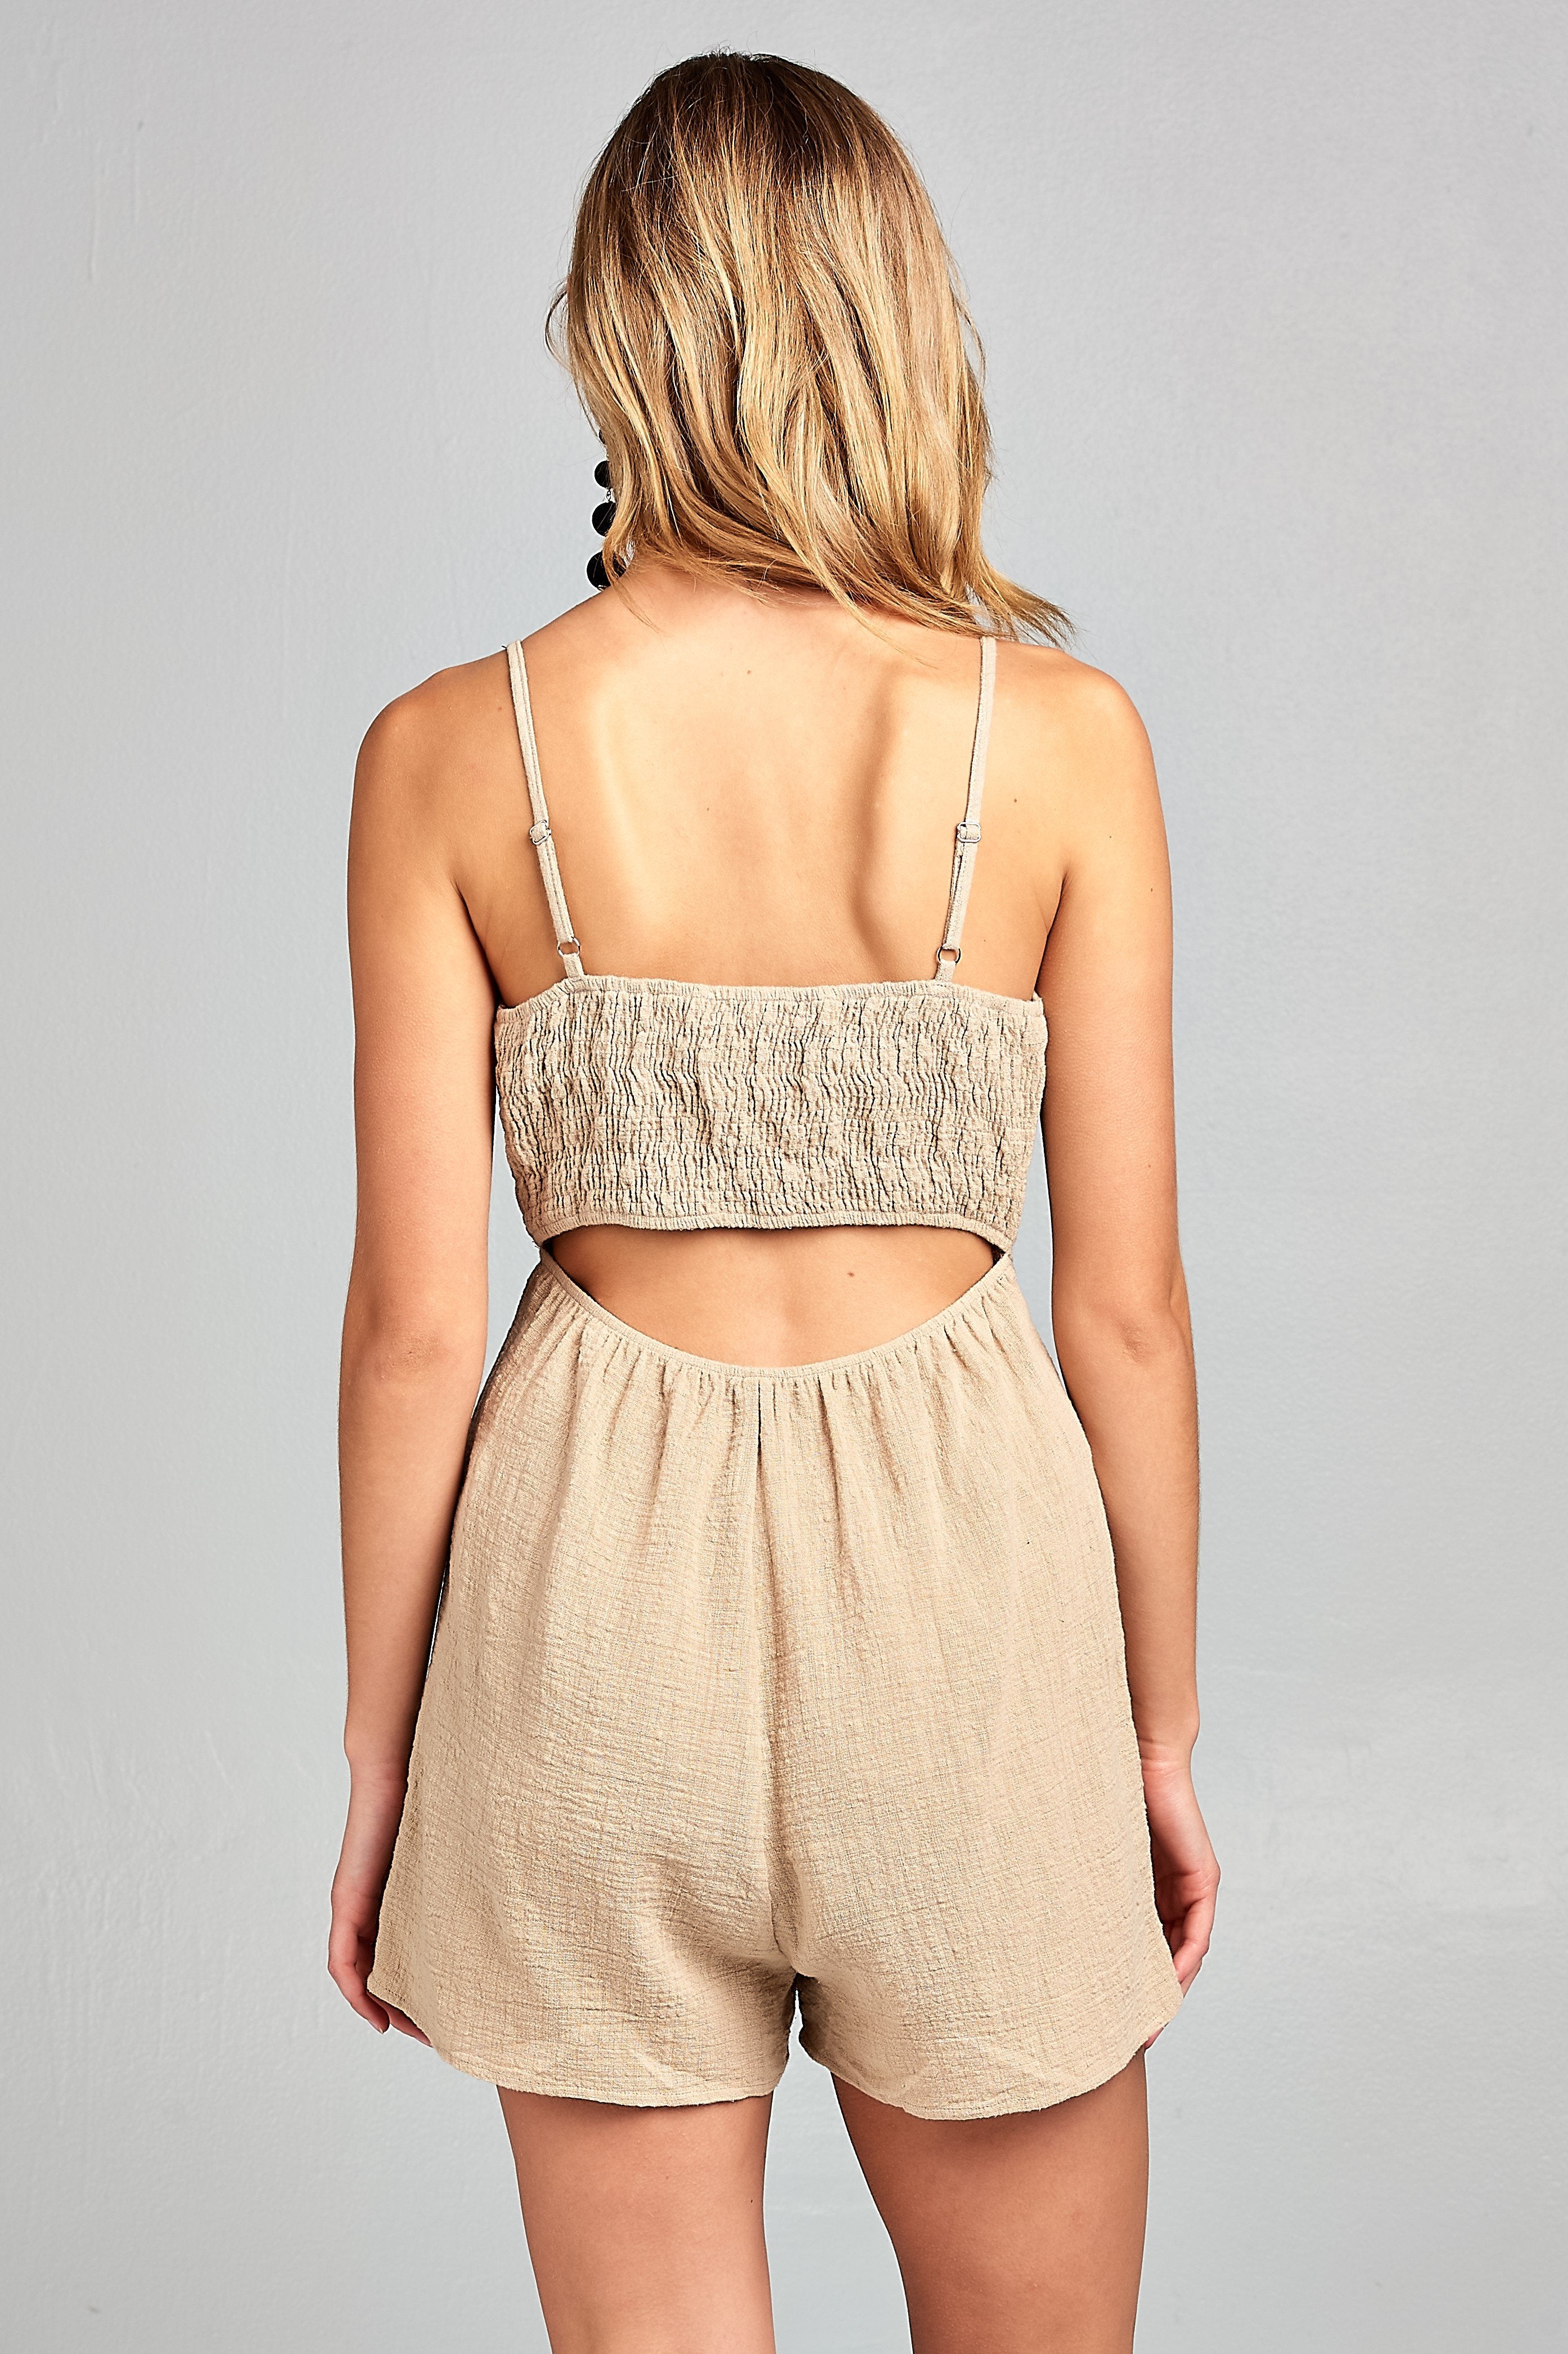 Picture of a Women's Elegant Romper with Front Tie back view